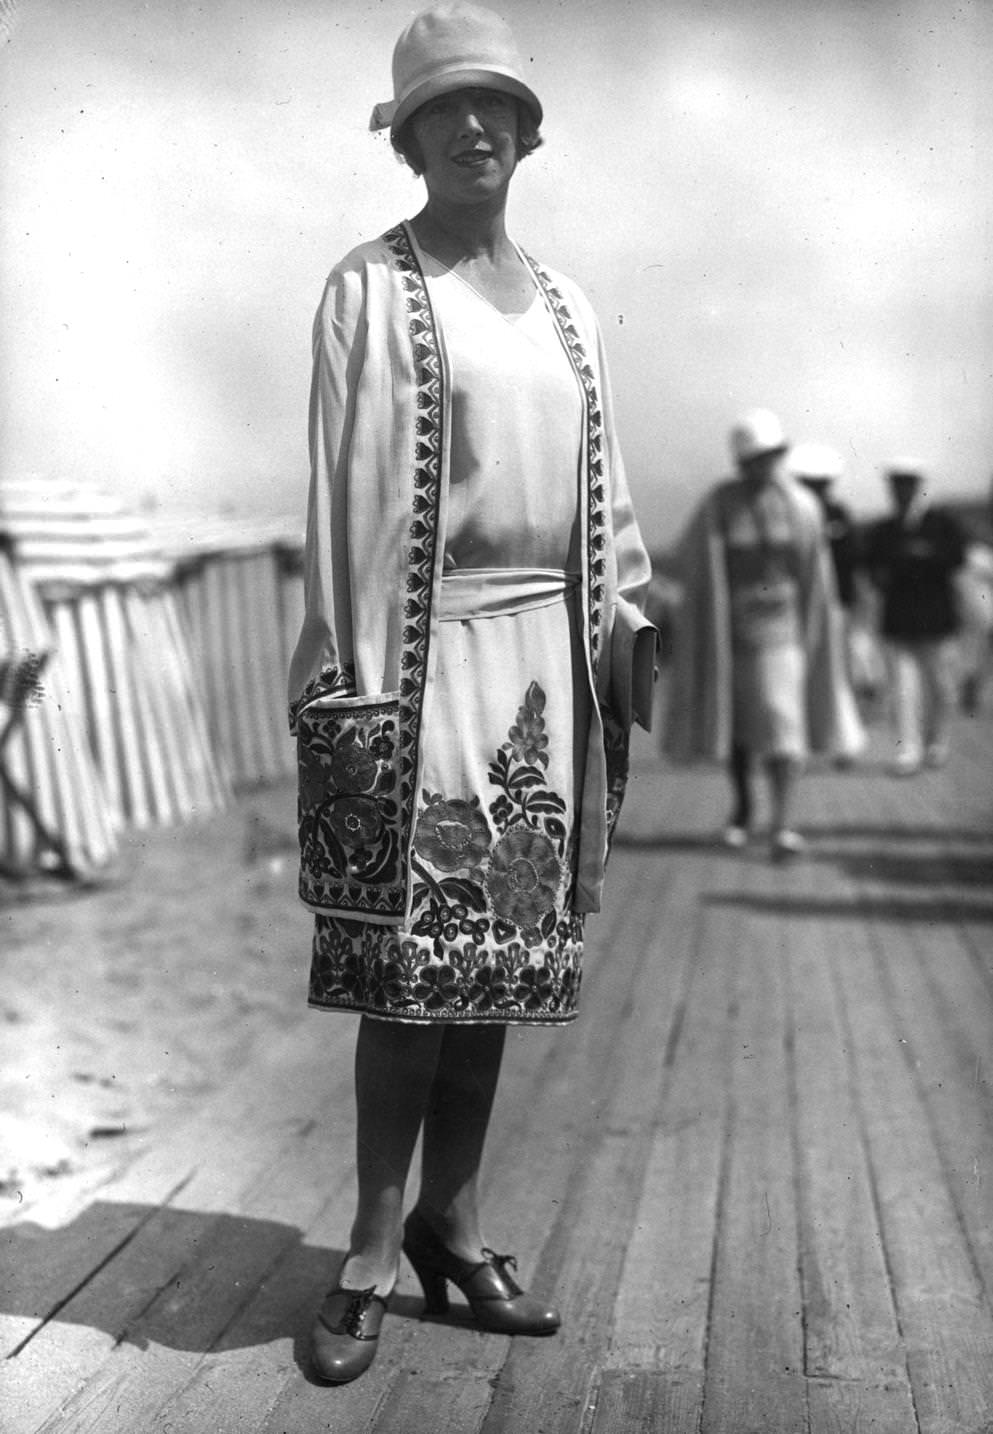 ummer outfit designed by Nicole Groult. A matching dress and three-quarter coat have flower embroidery round hems and on pocket. Outfit is completed with a cloche hat and lace-up court shoes, 1926